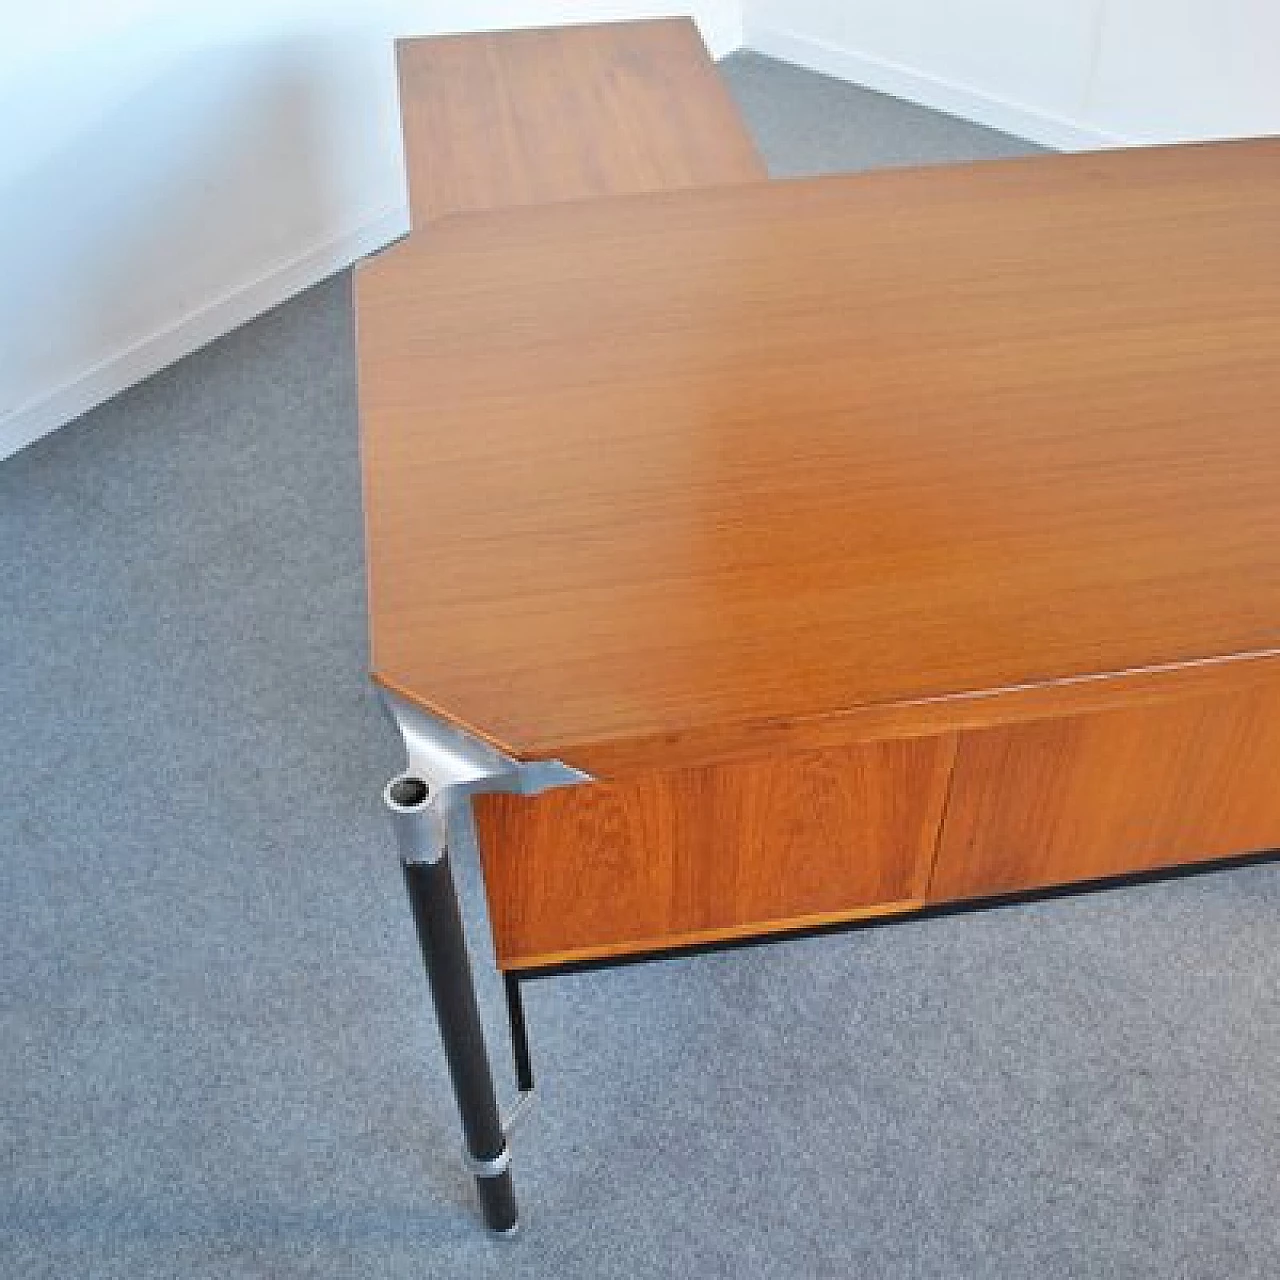 Executive desk by Ico Parisi for MIM Rome, 1950s 1412250